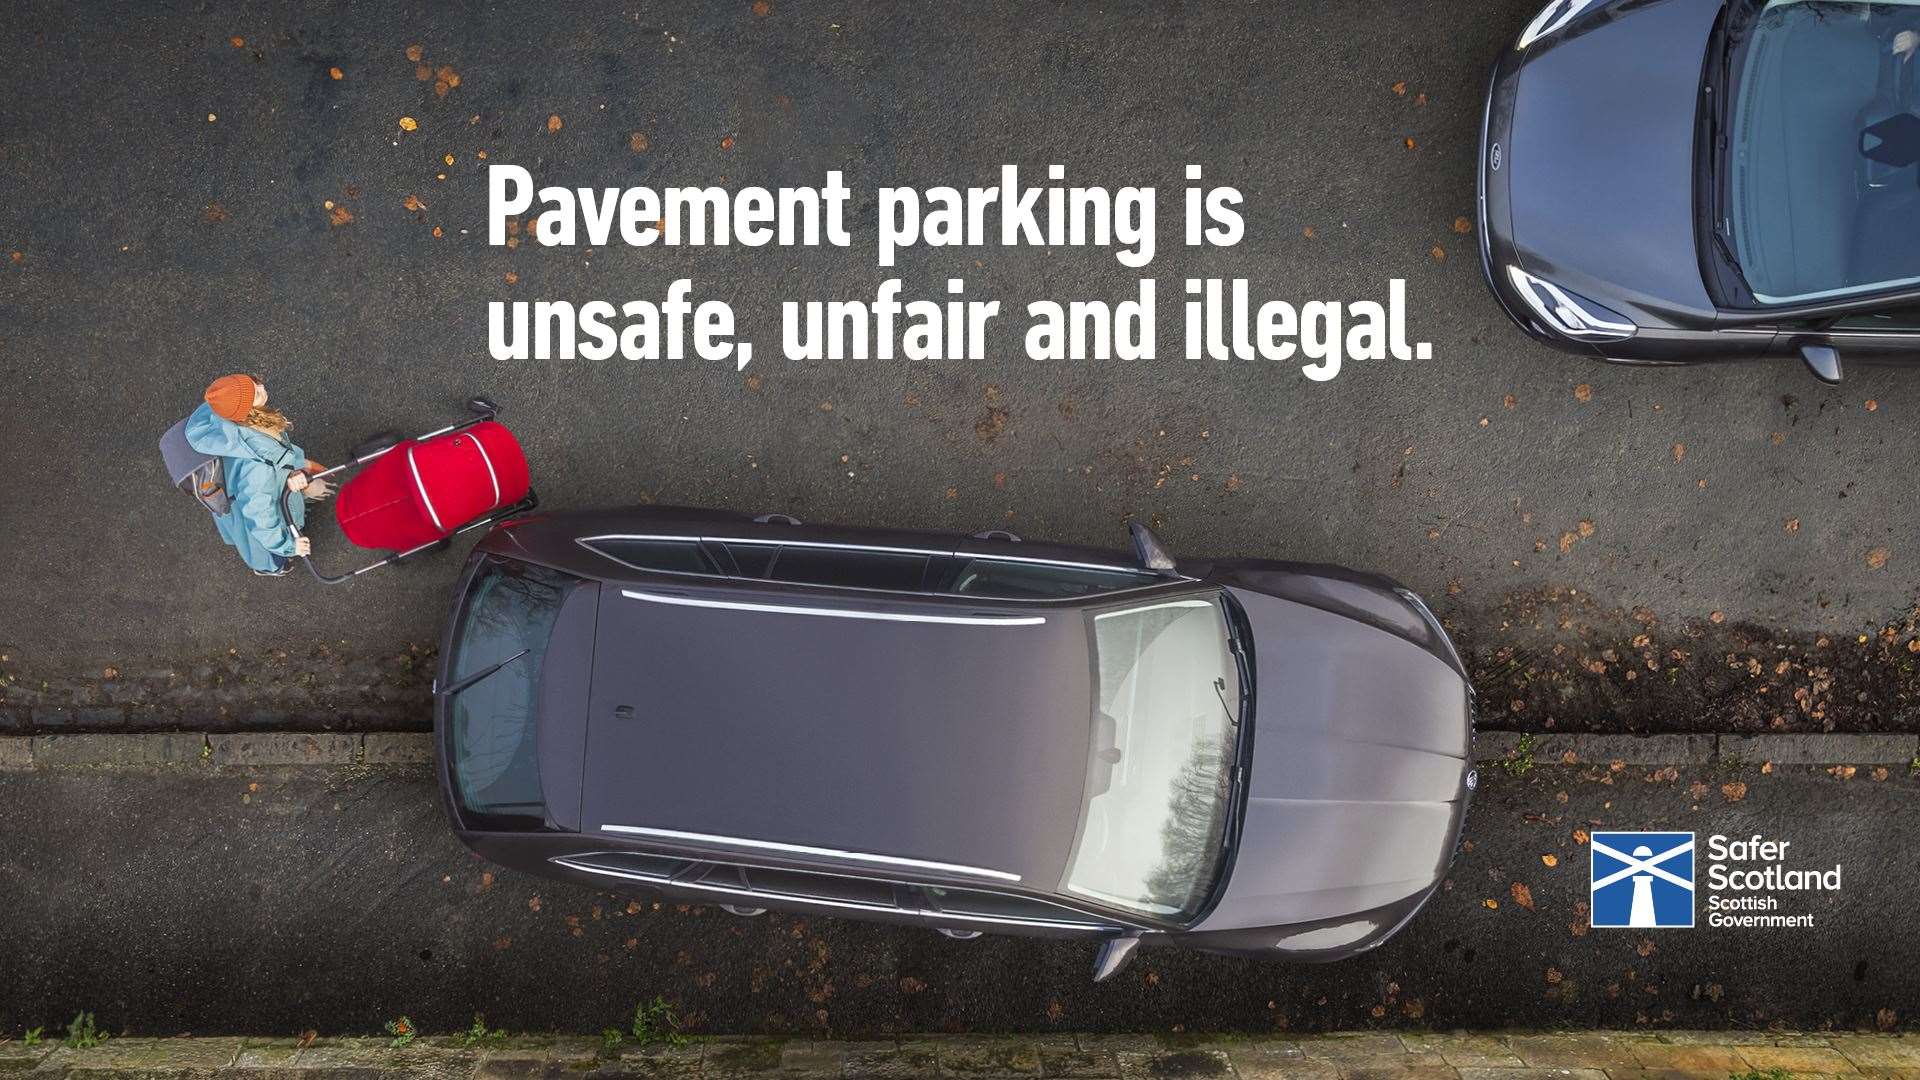 The ban on pavement parking will be enforced in the Highlands from February.